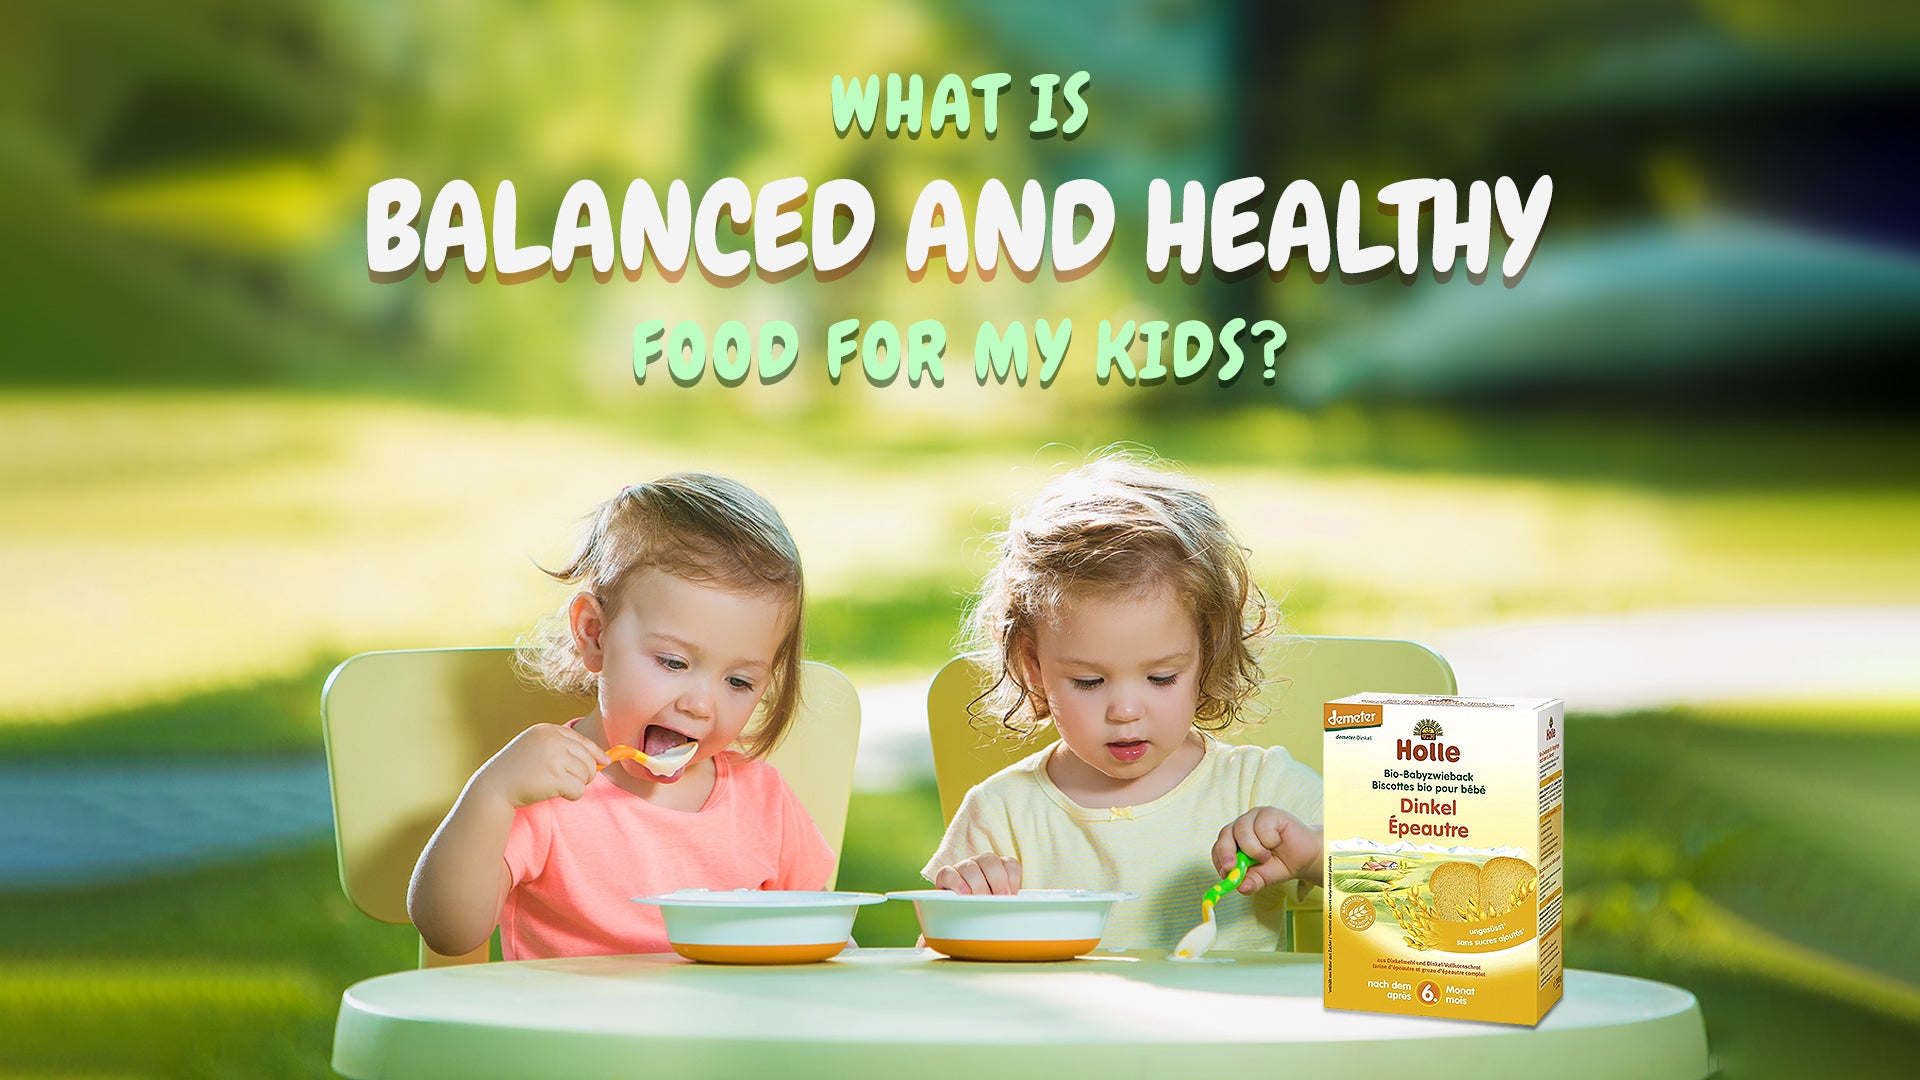 WHAT IS A BALANCED AND HEALTHY FOOD FOR MY KIDS?